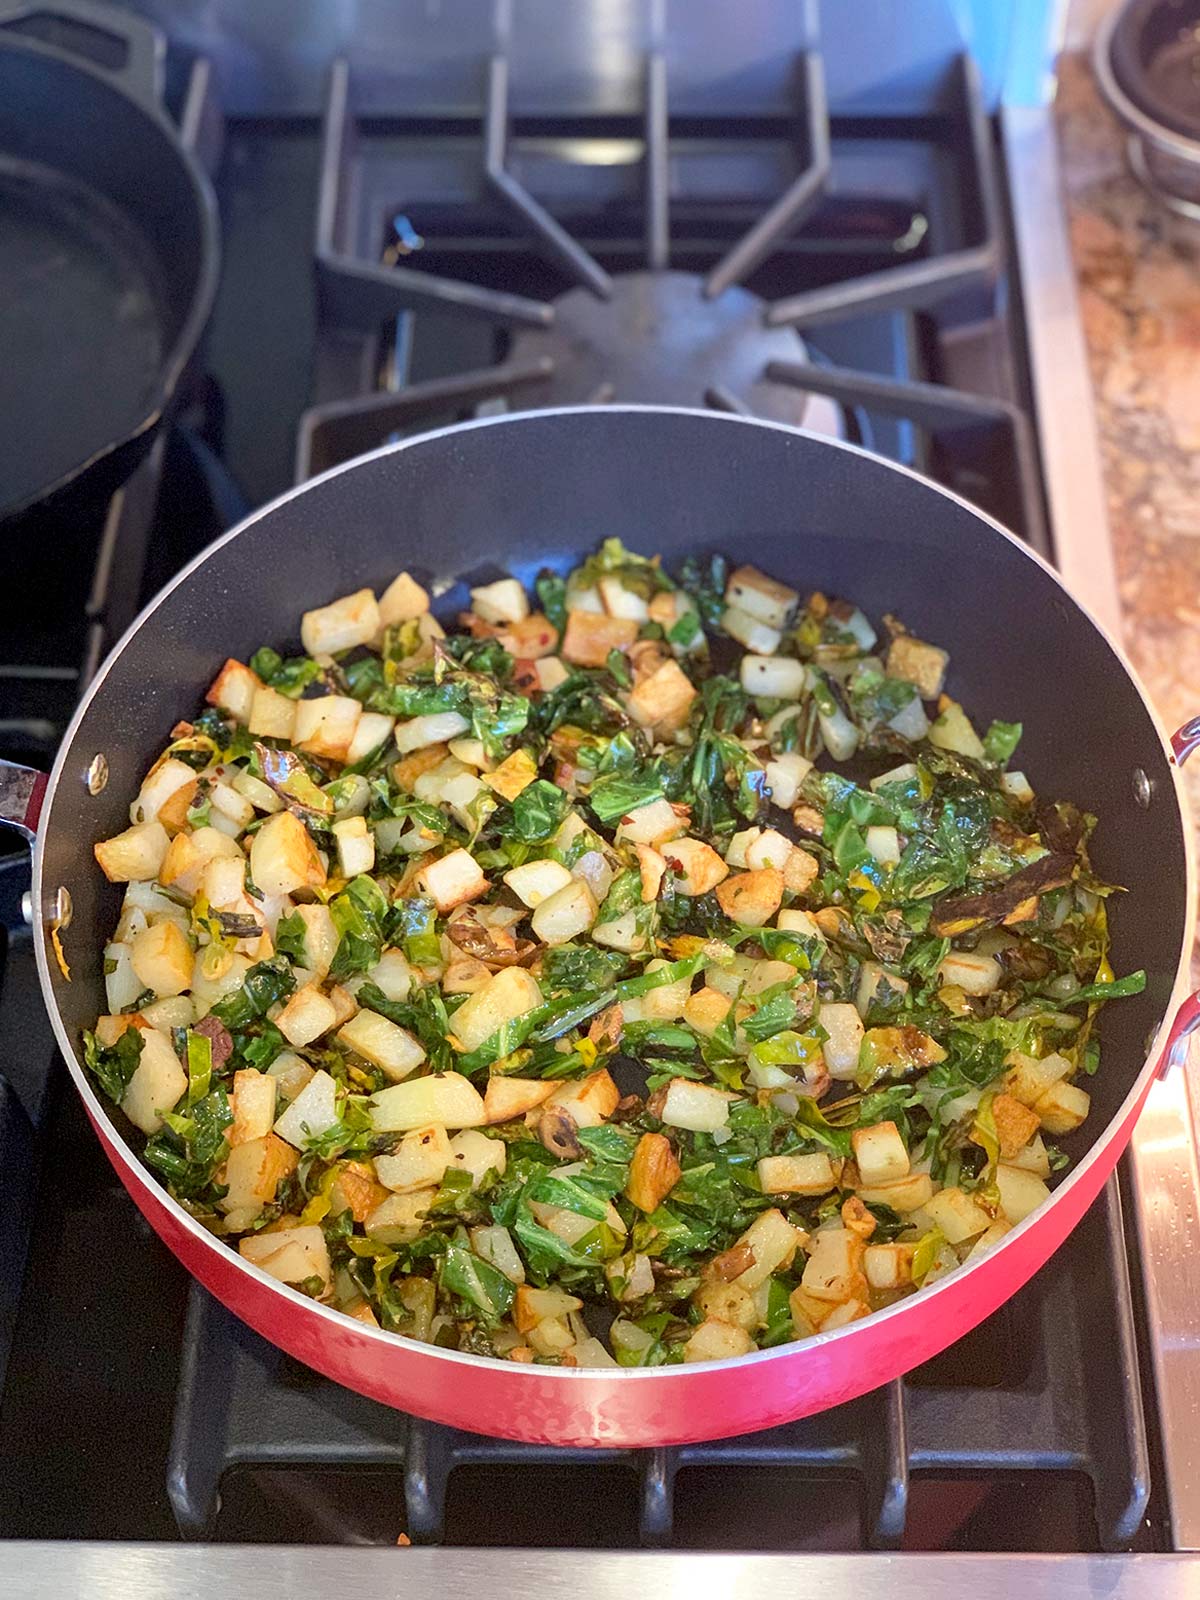 Greens and potatoes mixed together in the pan.